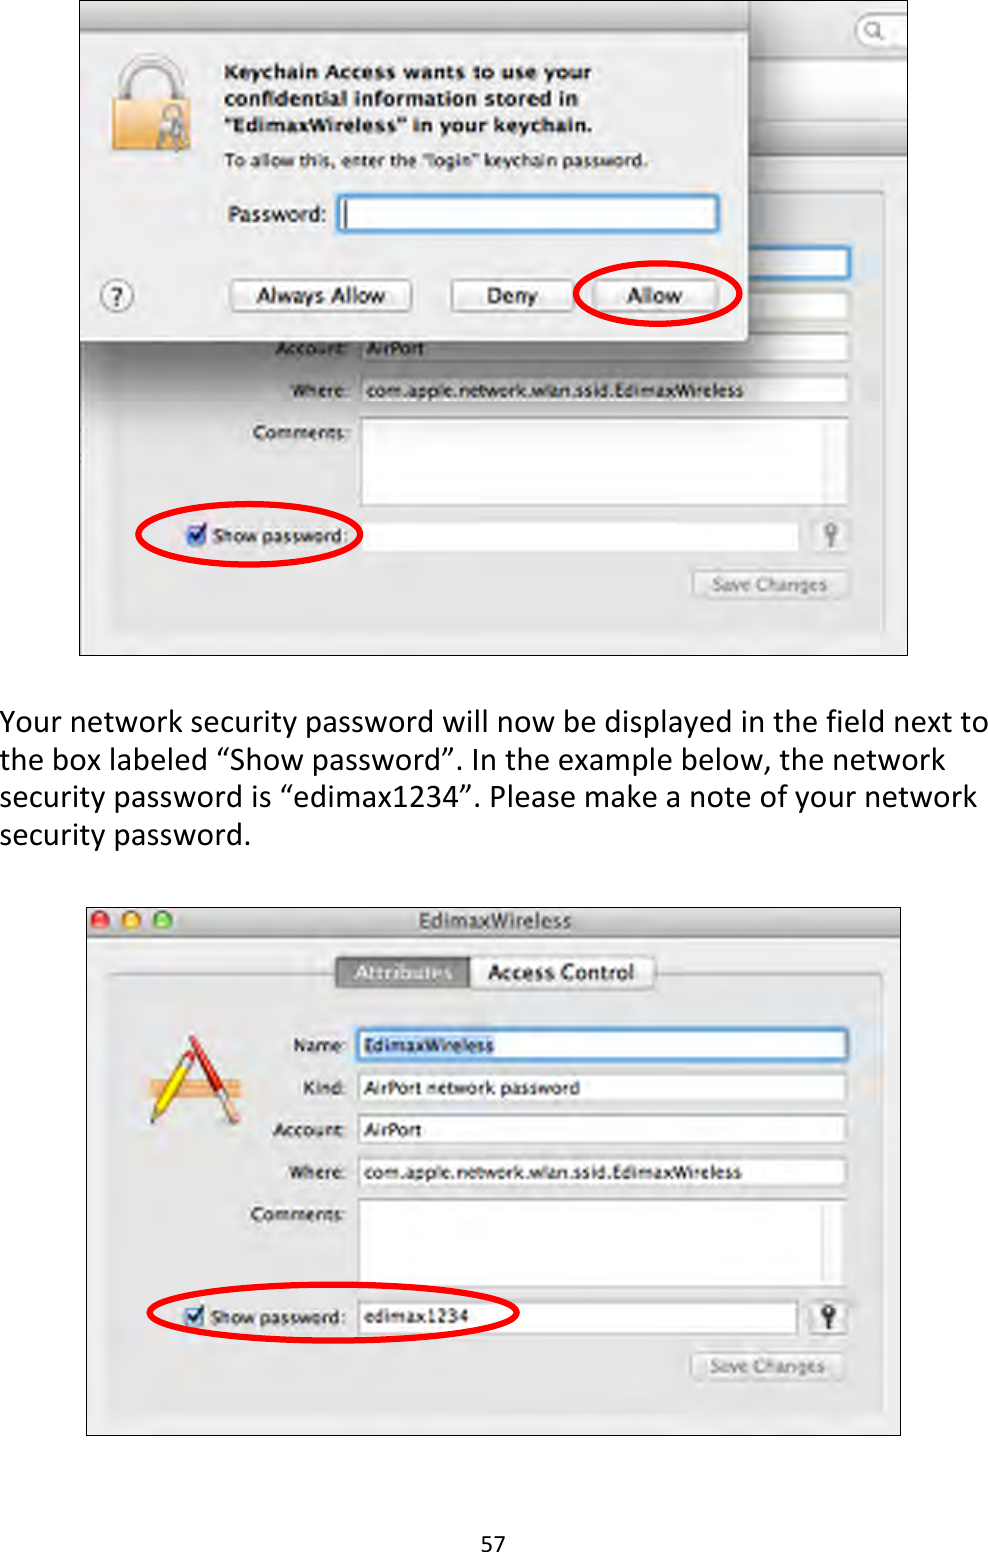 57    Your network security password will now be displayed in the field next to the box labeled “Show password”. In the example below, the network security password is “edimax1234”. Please make a note of your network security password.     